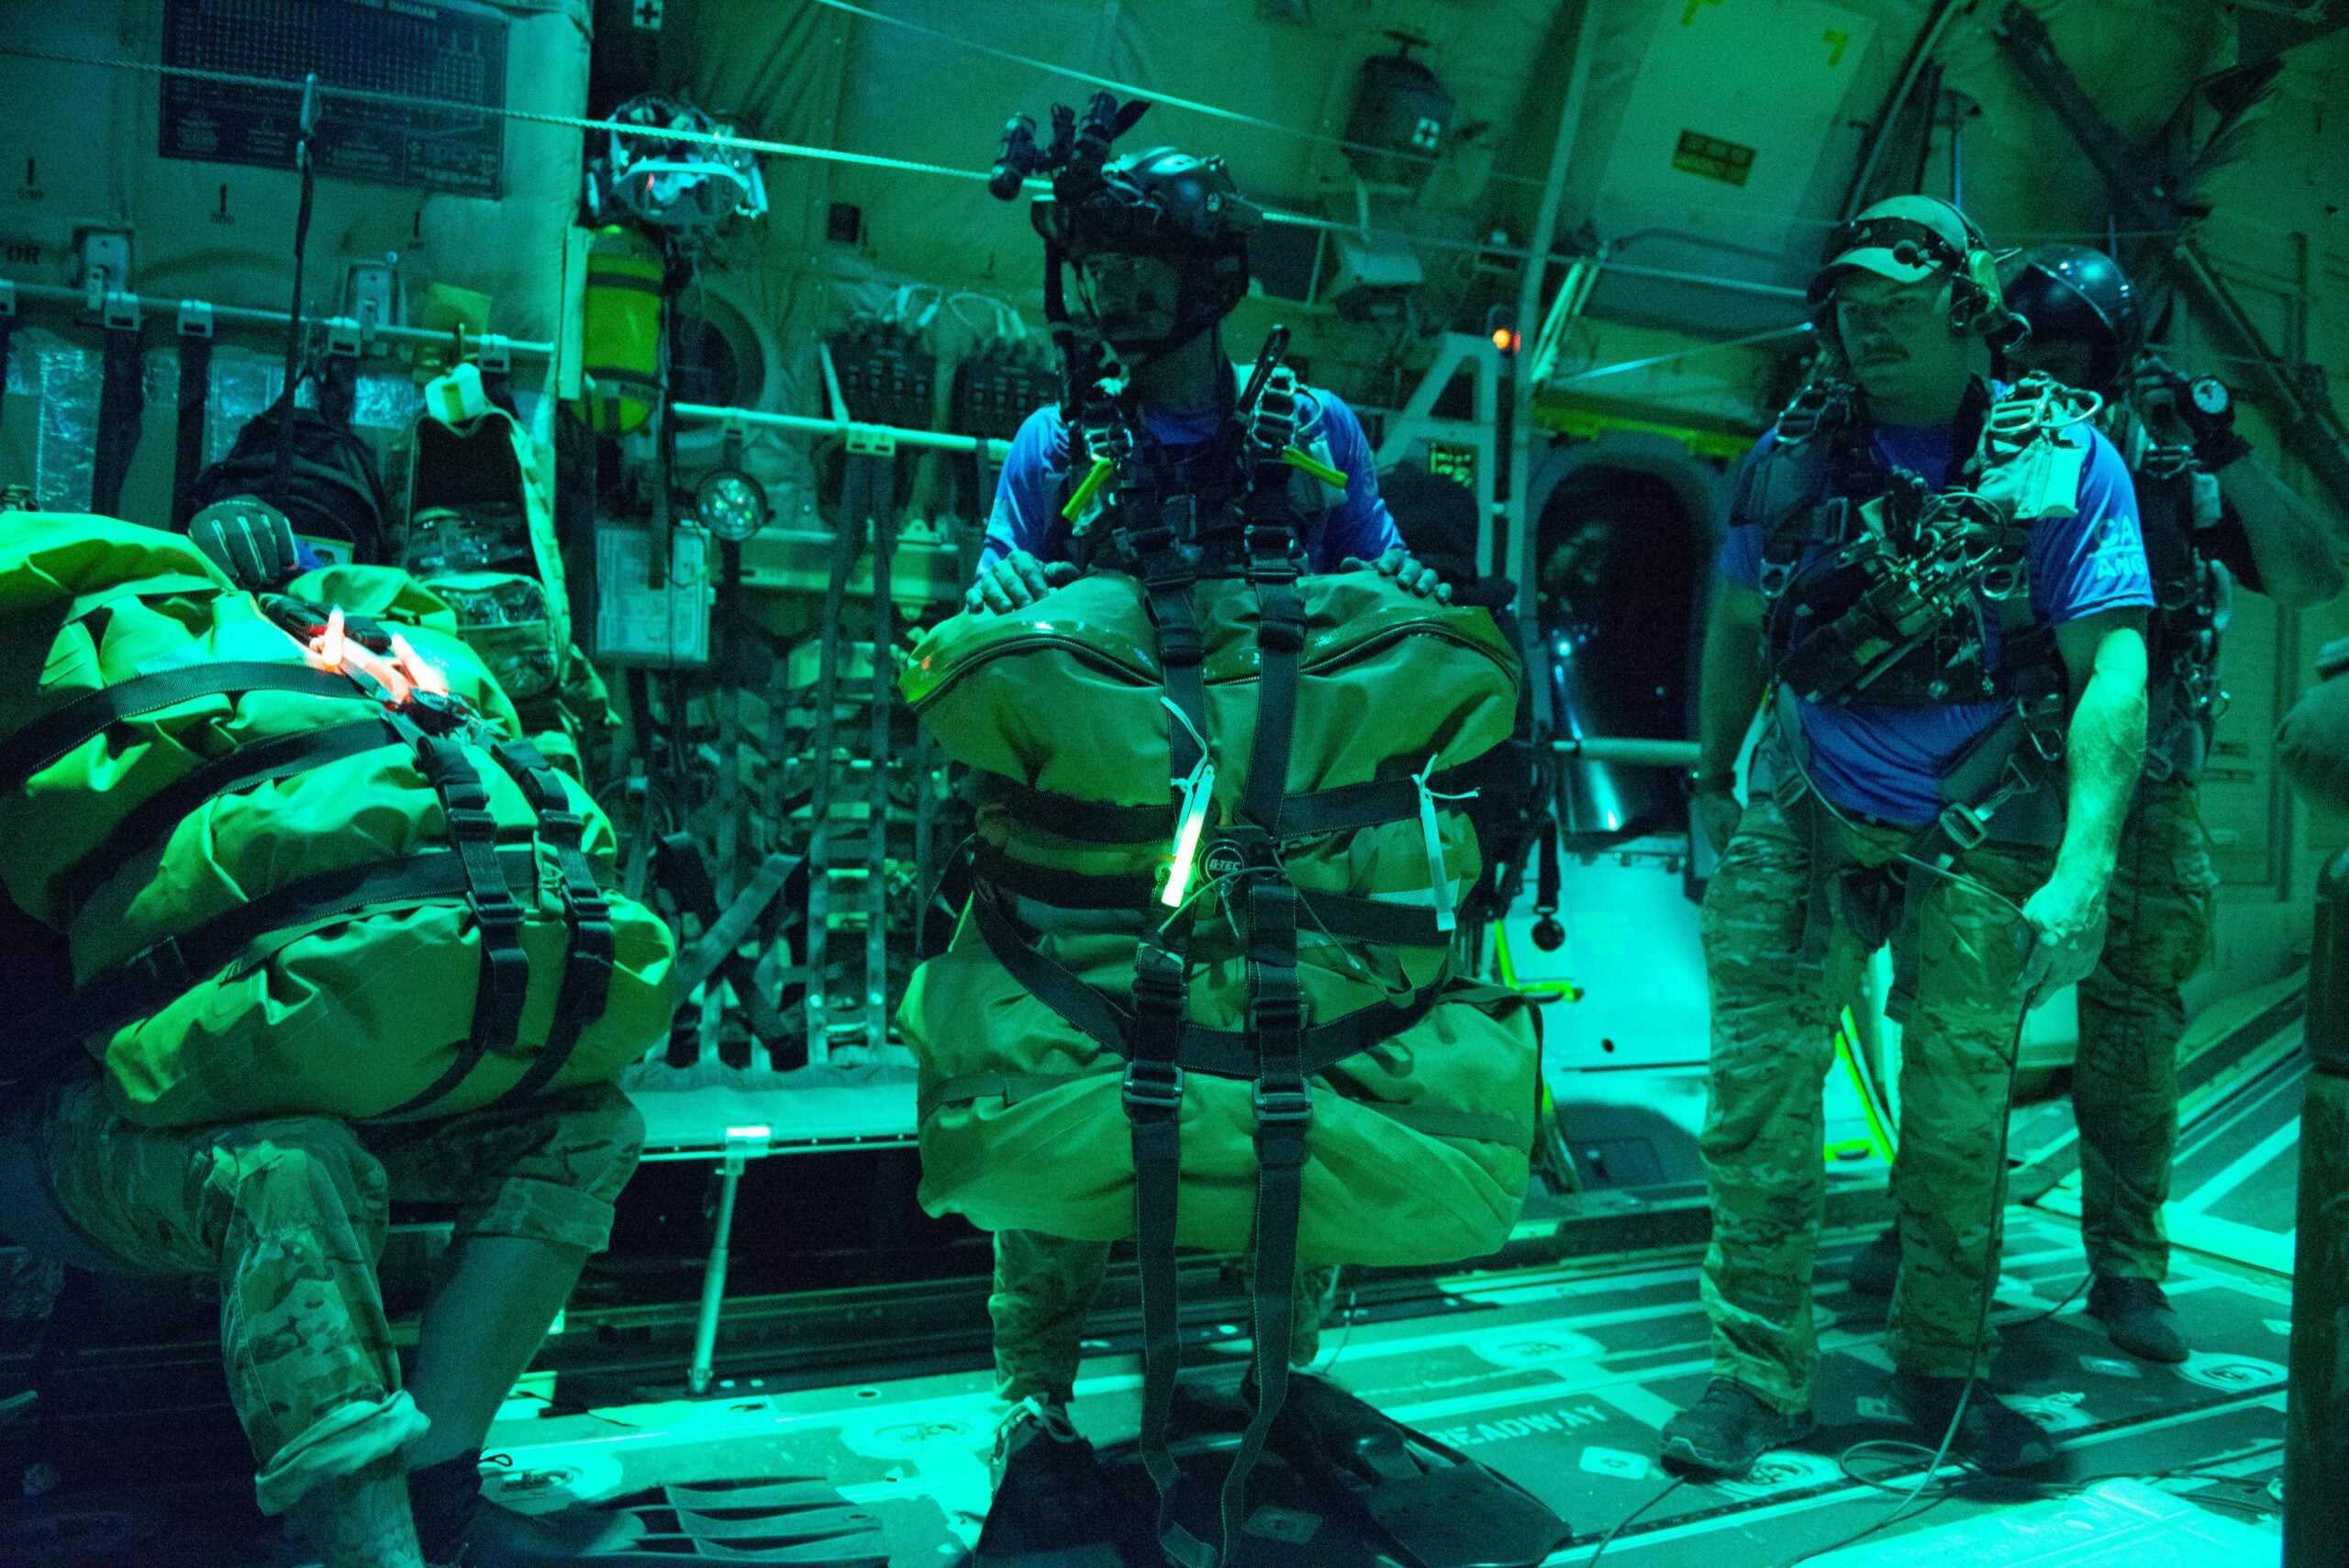 Air Force Pararescue operators have performed about a dozen open ocean parachute missions since 2010, about half of which were executed by the California Air National Guard's 129th Rescue Wing. (Staff Sgt. Duane Ramos/Air Guard).